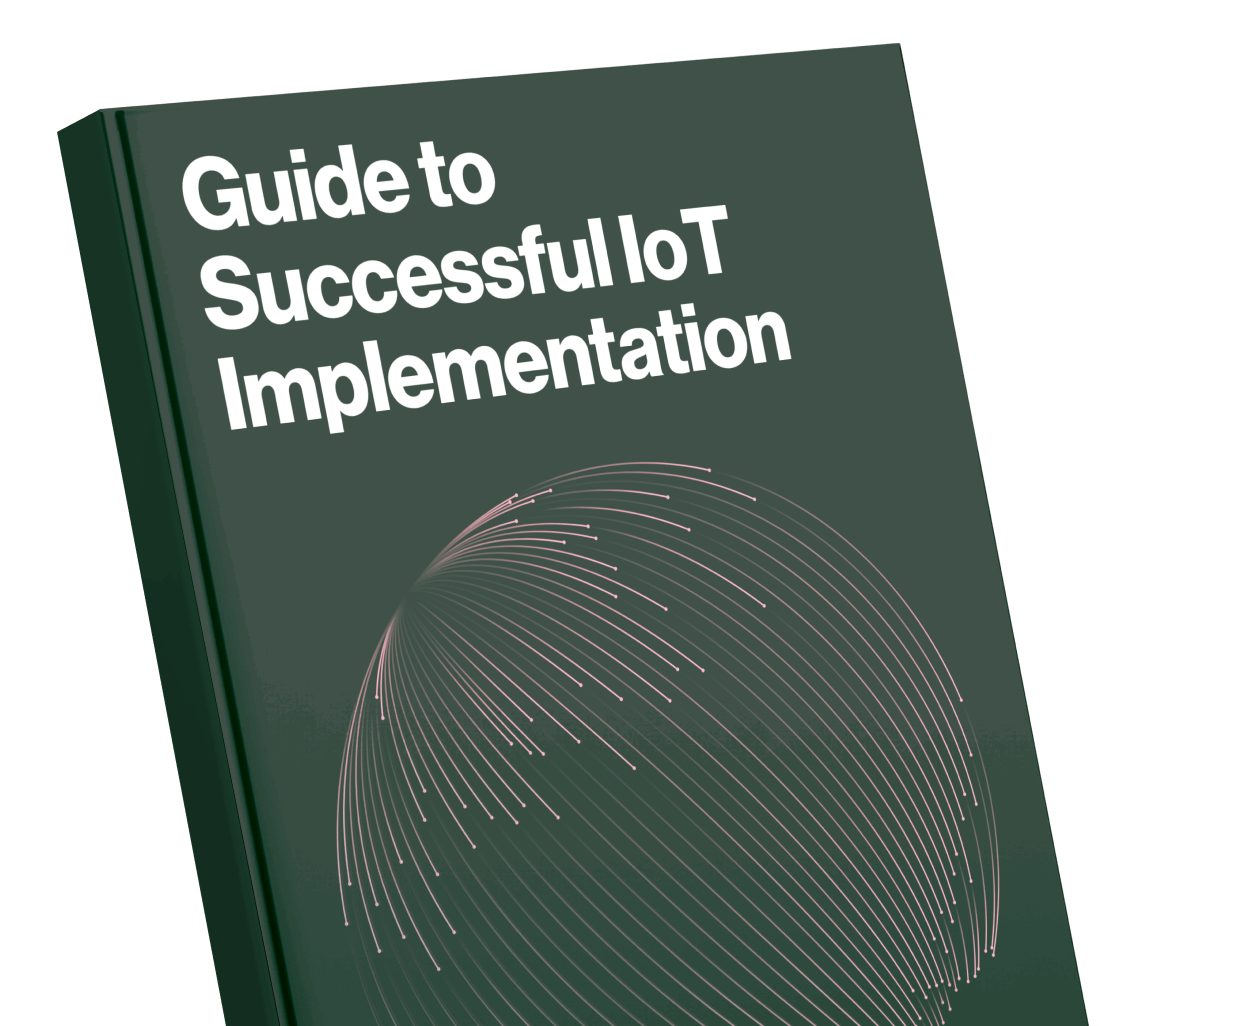 Guide to Successful IoT Implementation